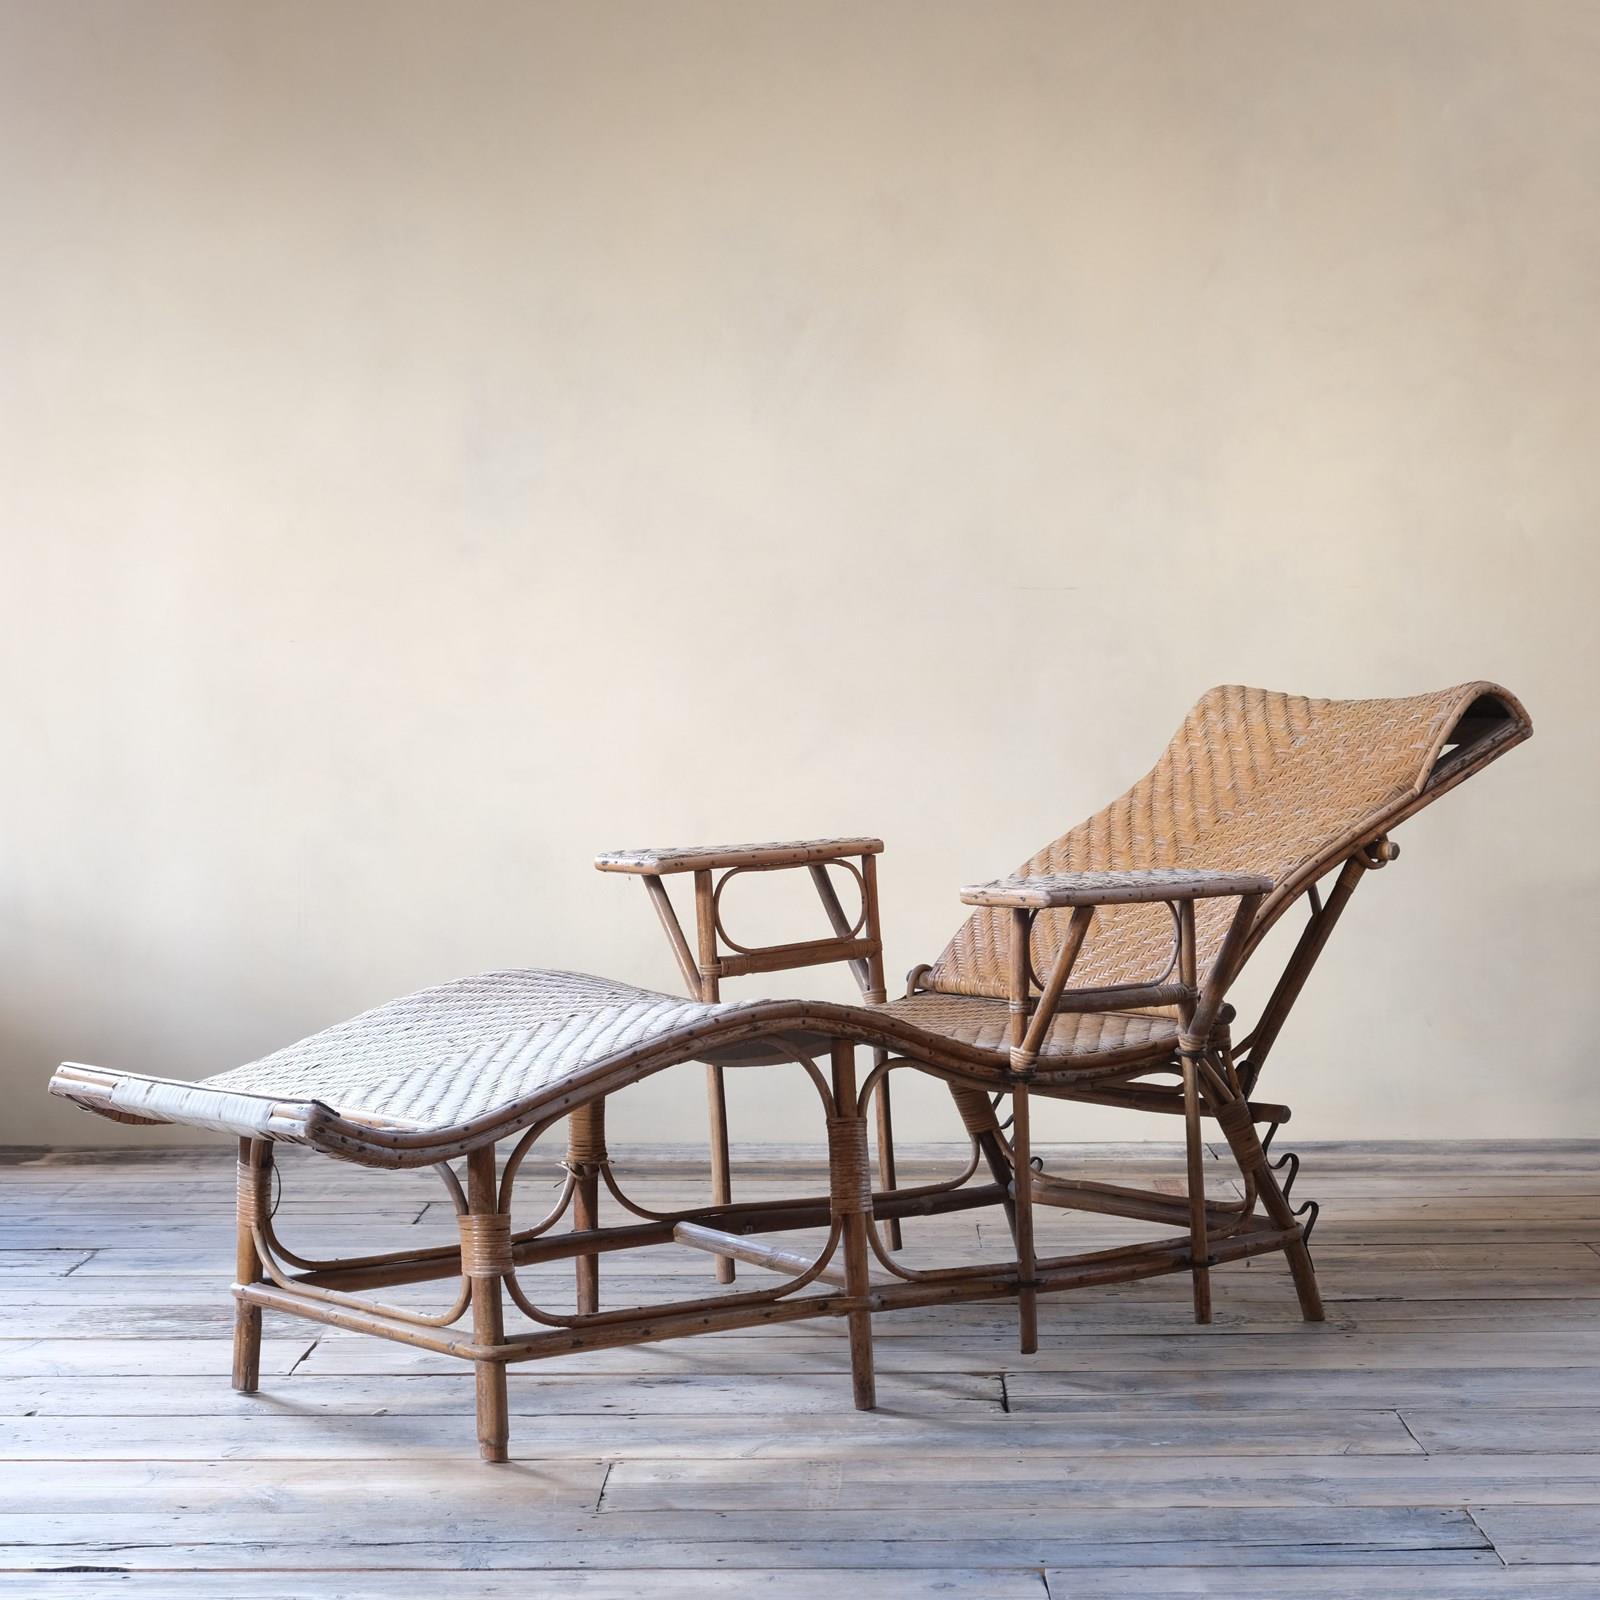 Antique French Rattan Lounger Chaise Lounge - Decorative Collective